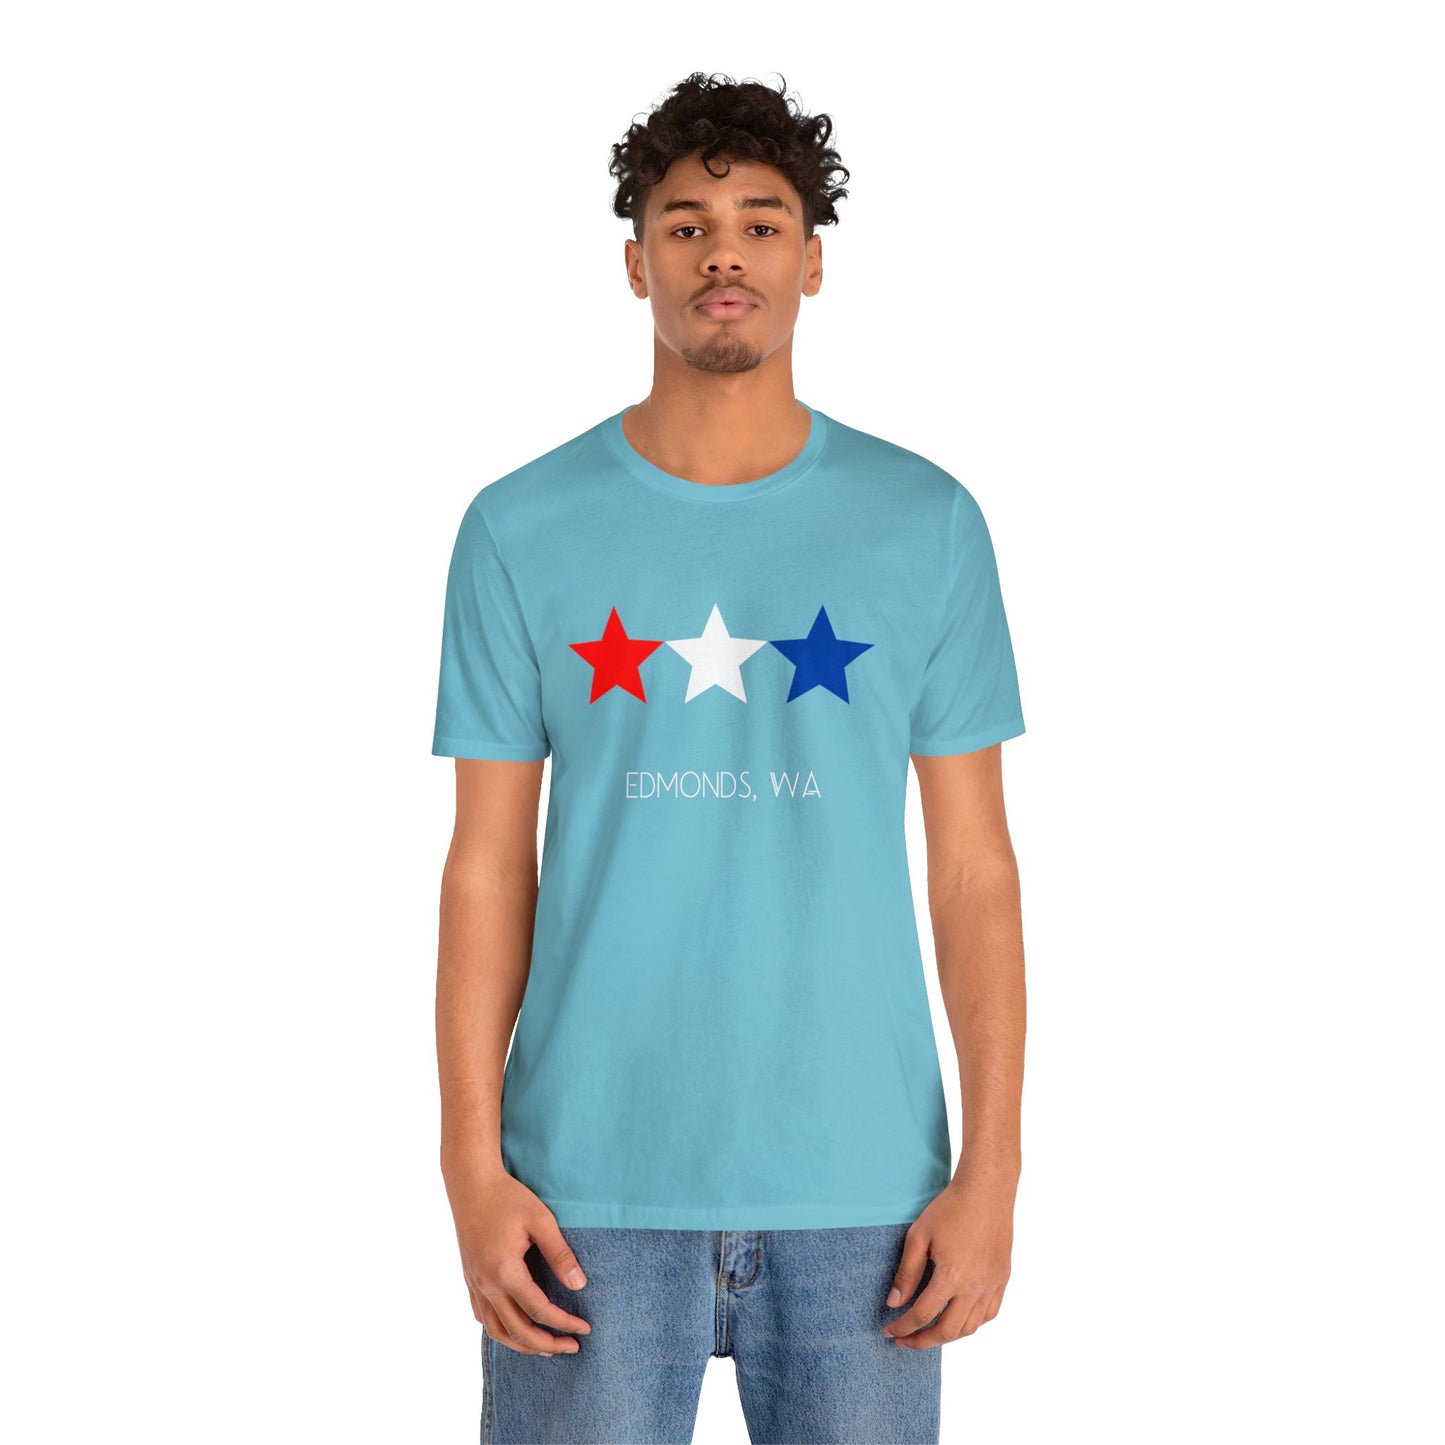 Edmonds Red White and Blue Star T-shirt